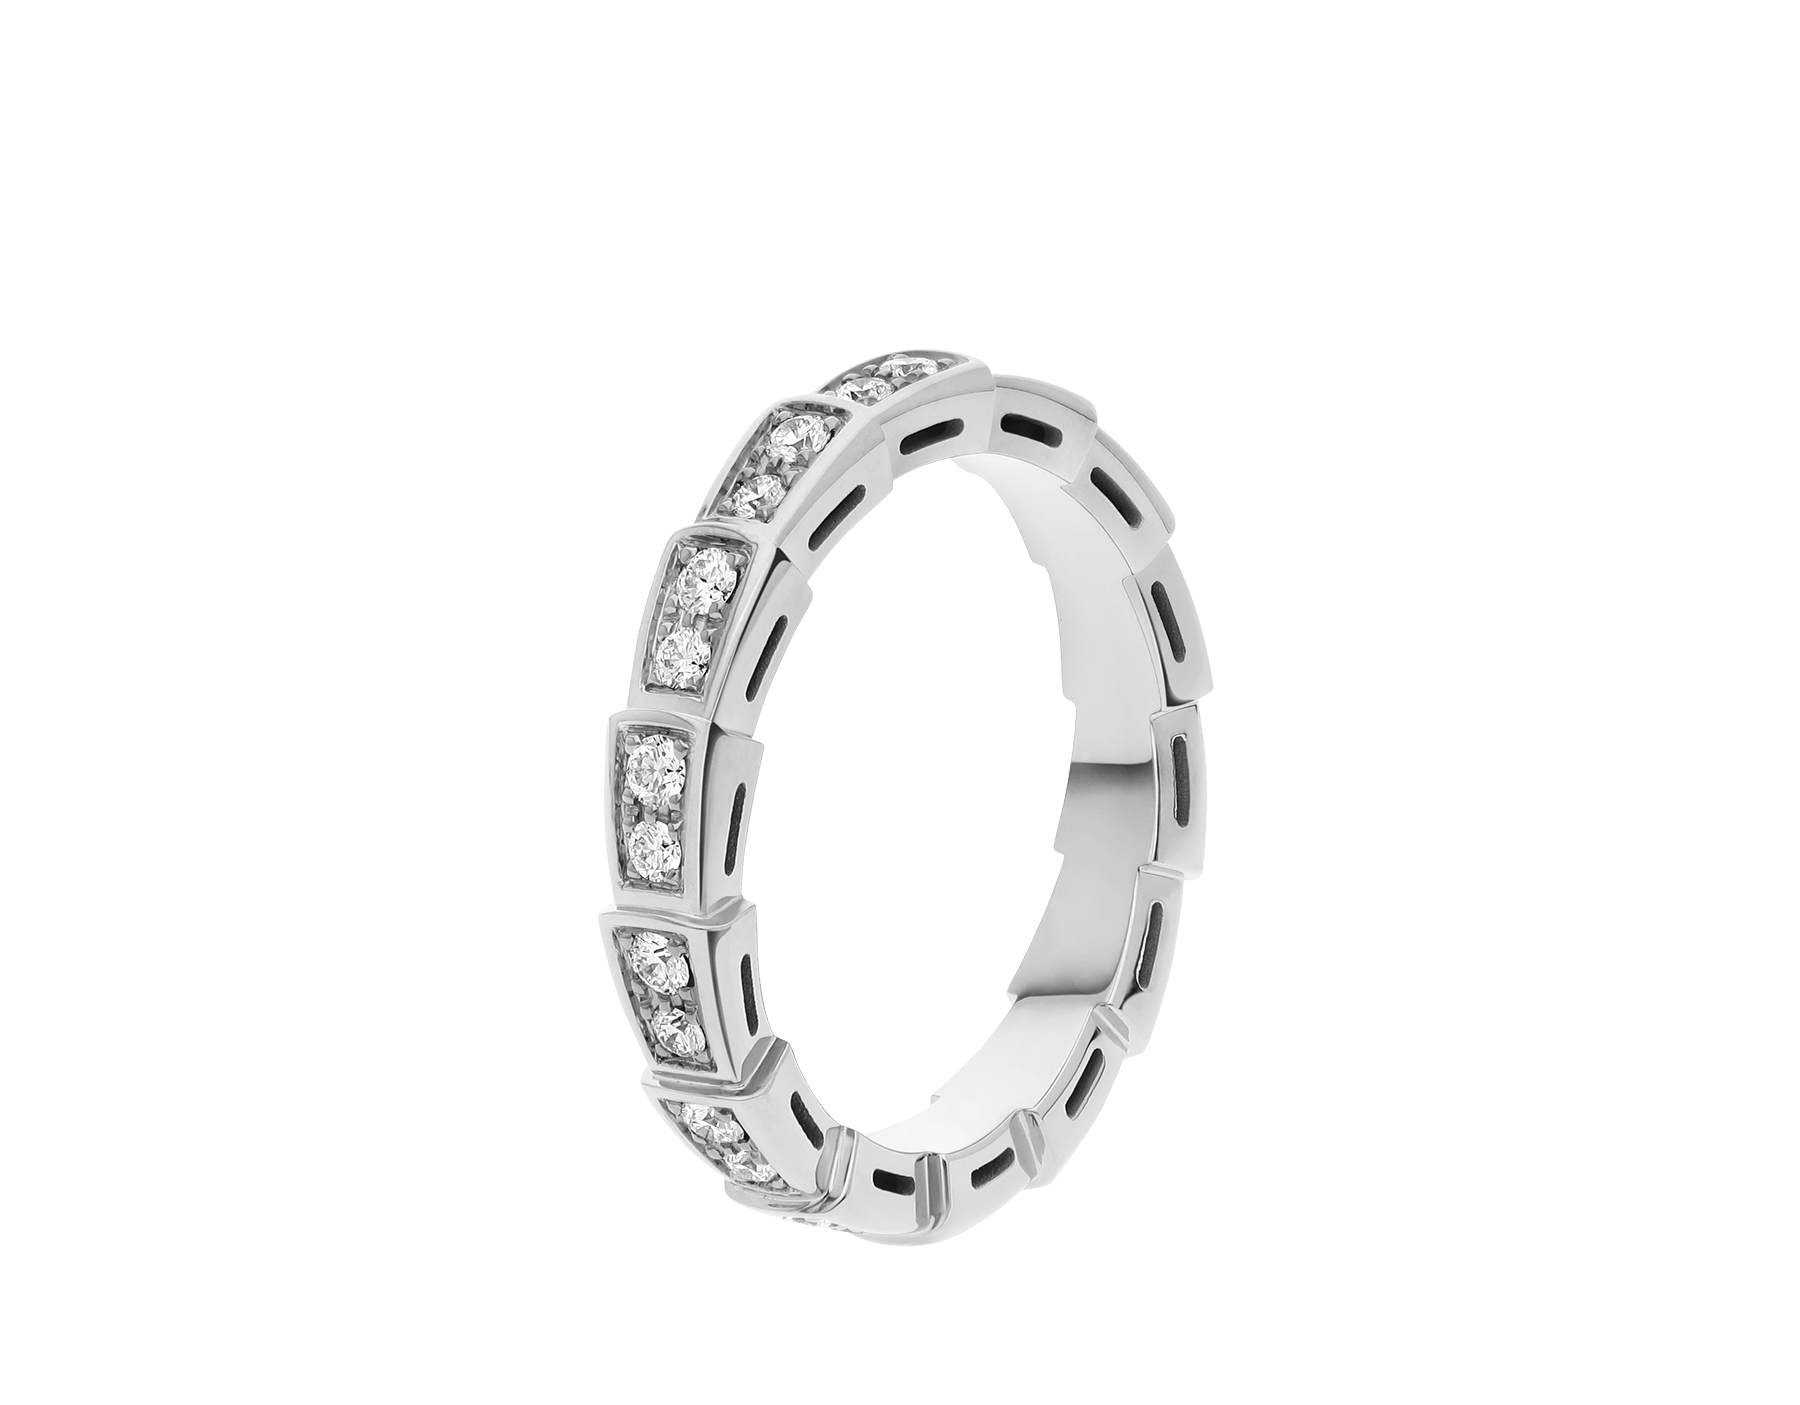 Serpenti Viper wedding band in 18 kt white gold, set with full pavé diamonds. AN856949 image 1